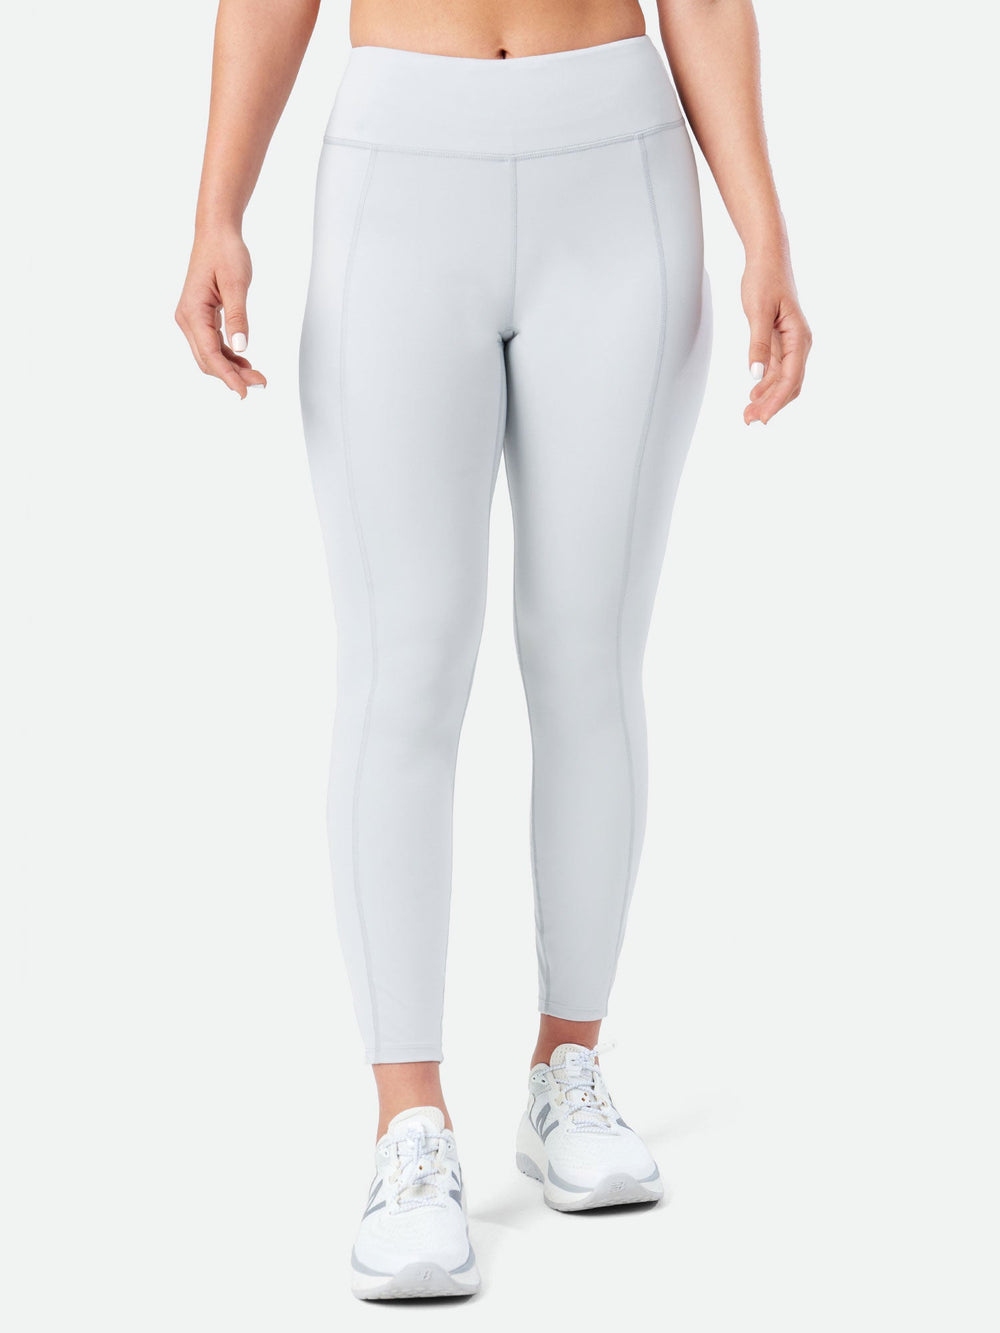 Grey Leggings for Women, Shop Mid-rise & High-waisted